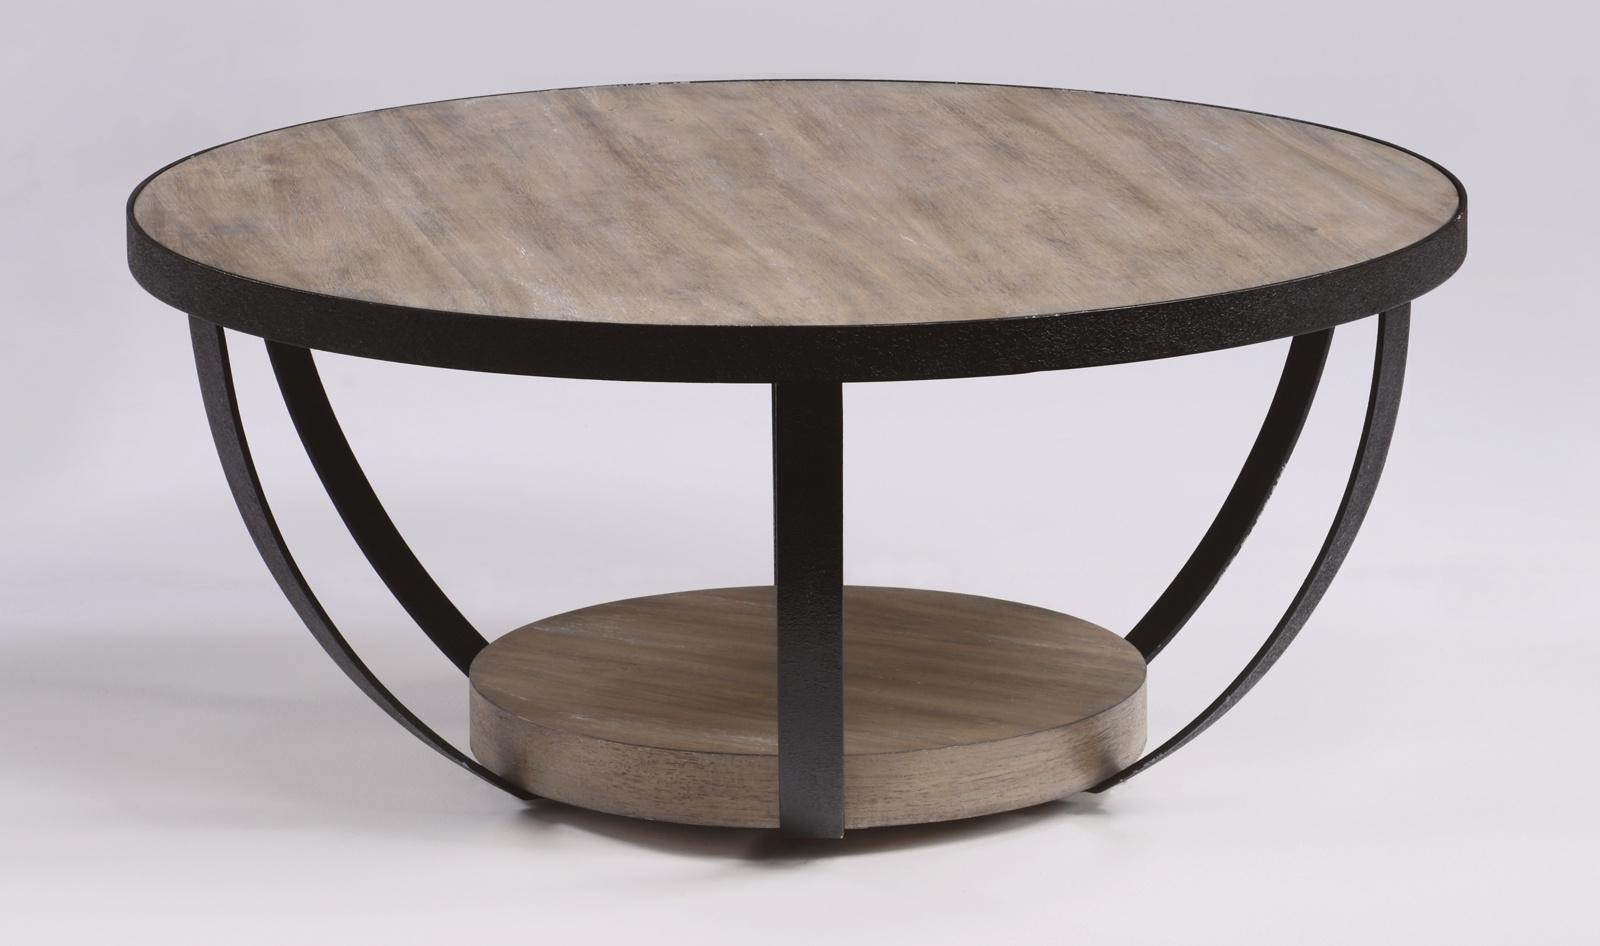 Flexsteel Compass Round Cocktail Table in Gray/Black